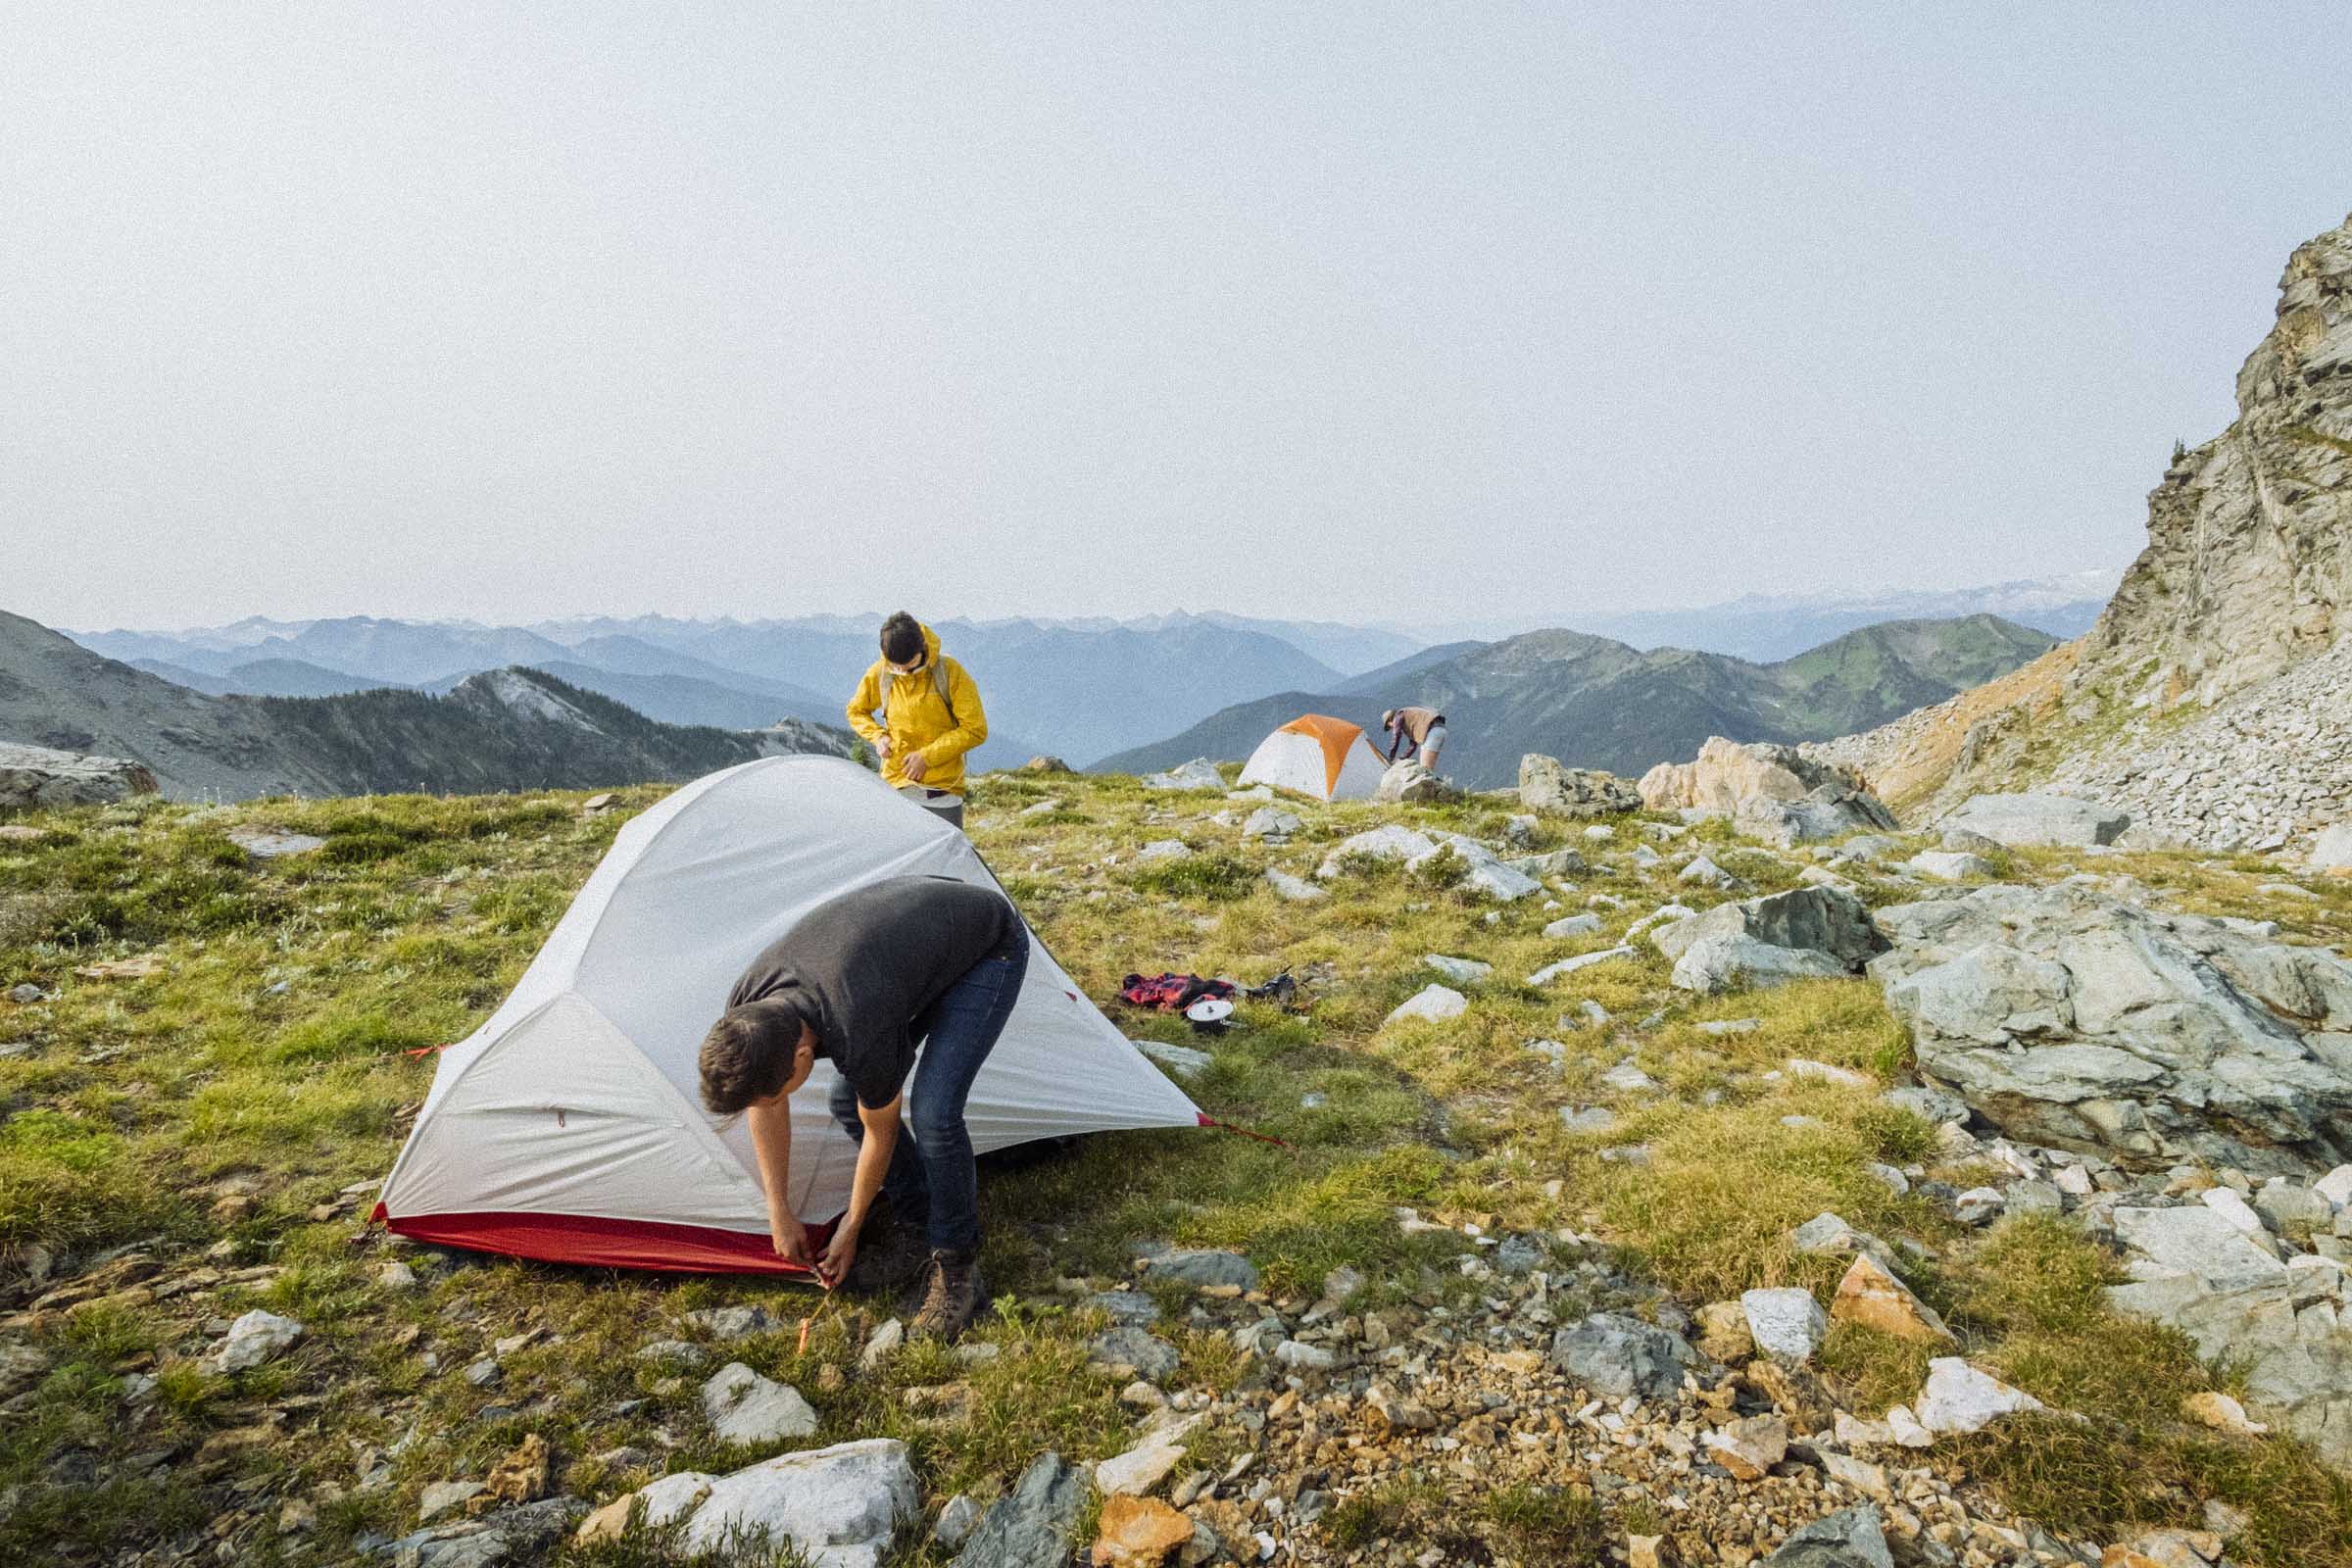 Packing up the tents high in the BC backcountry